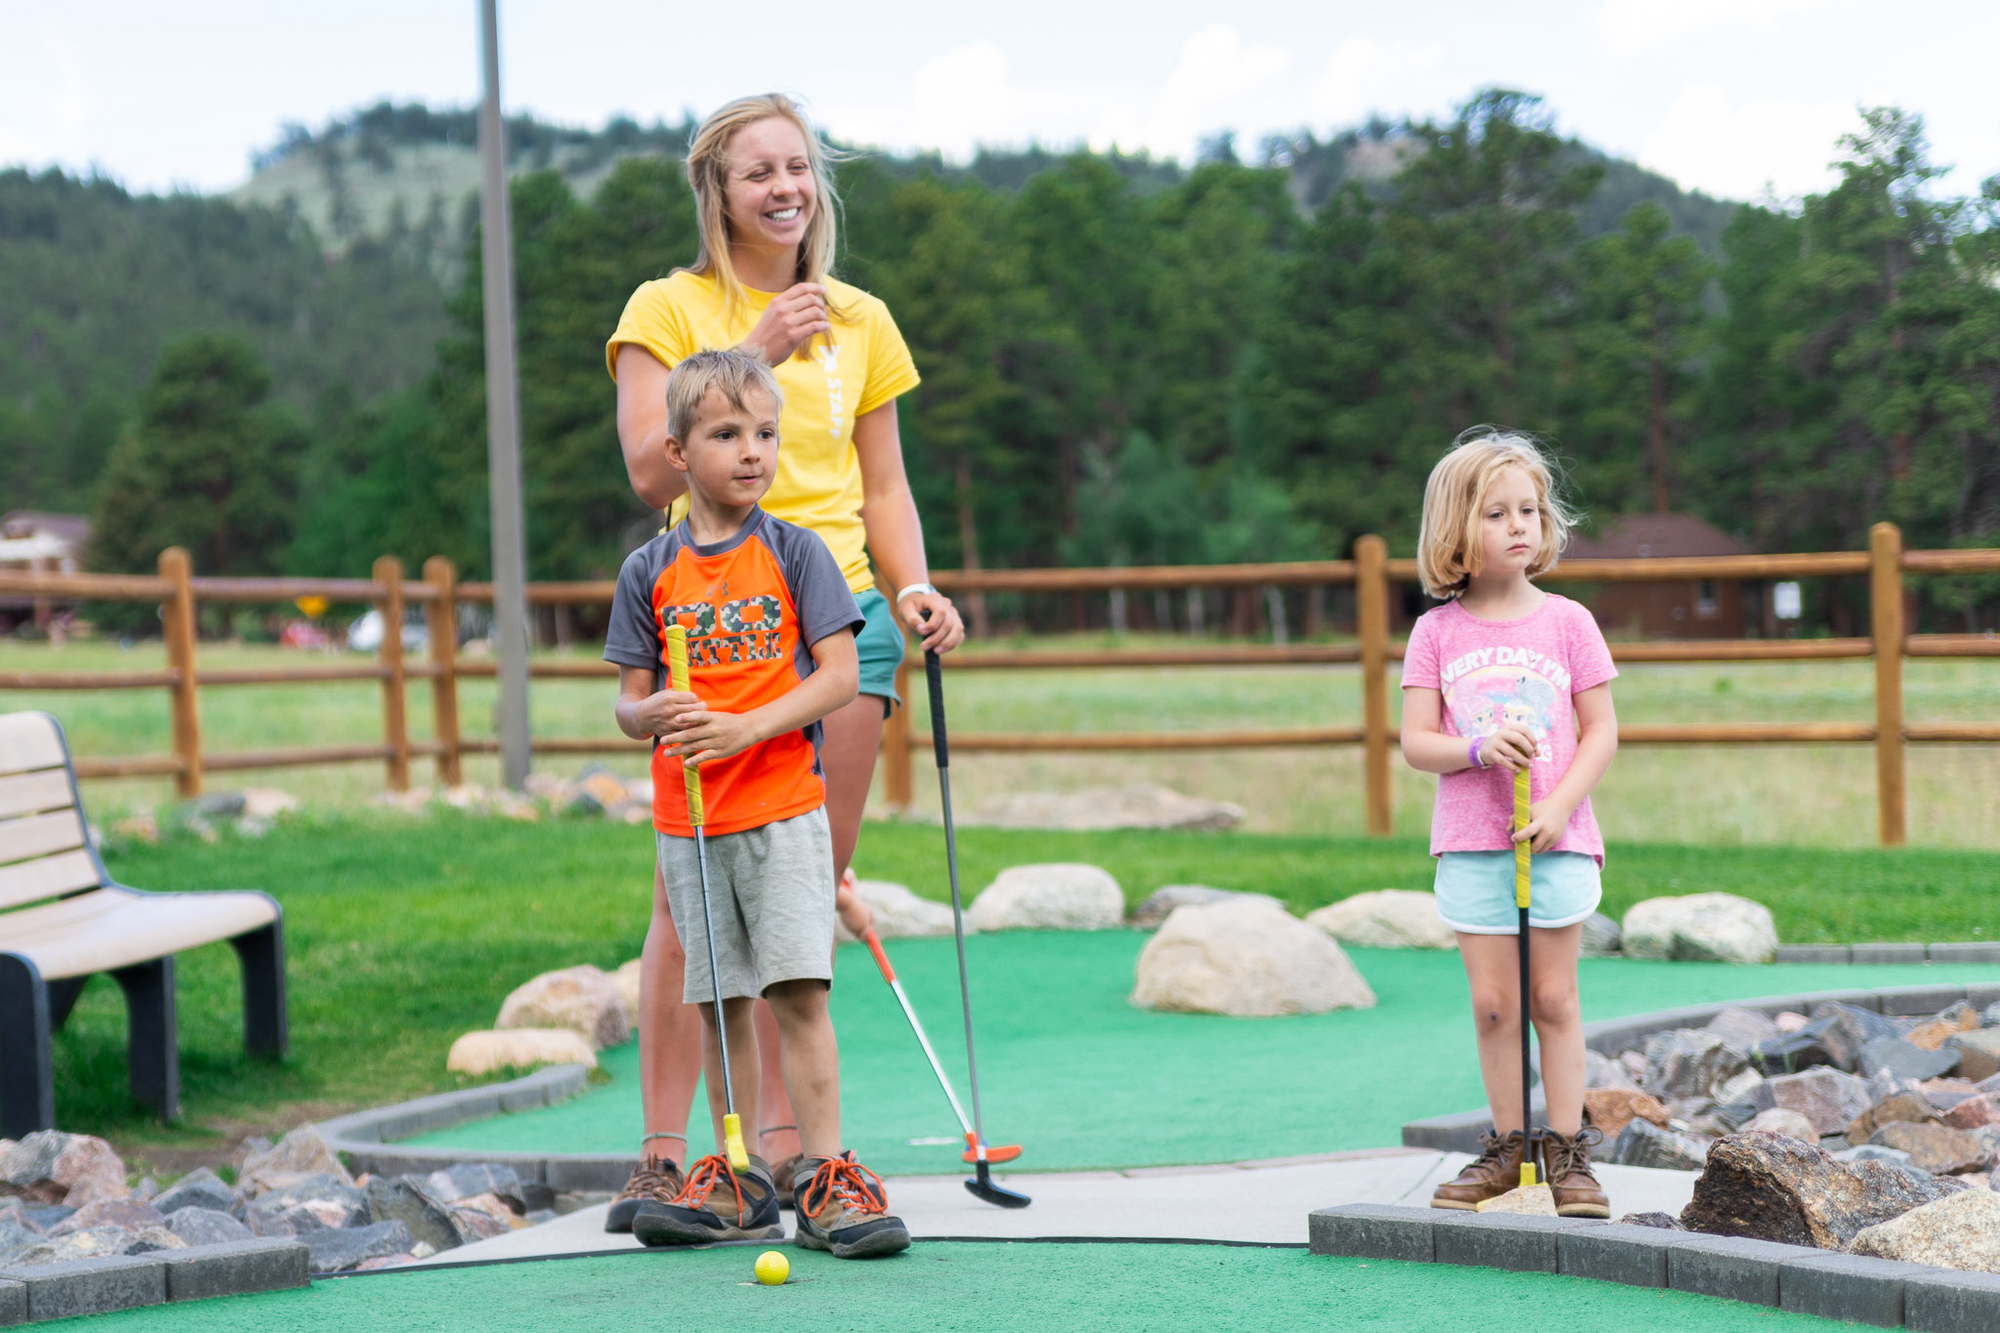 Adult and two children playing mini golf